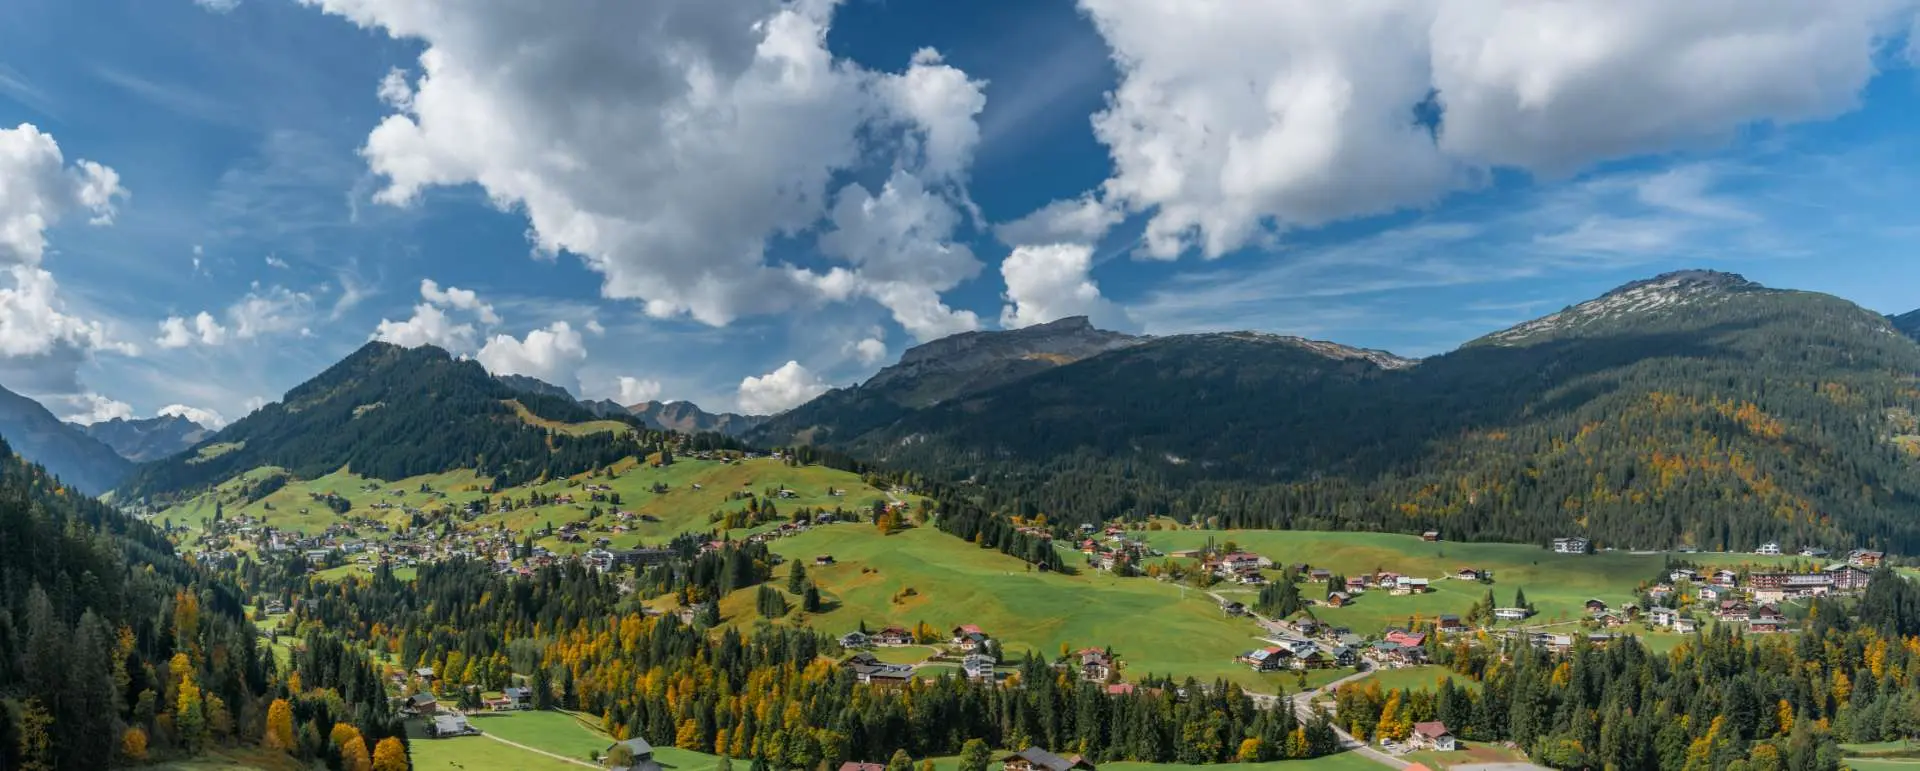 Kleinwalsertal - the destination with large hotels